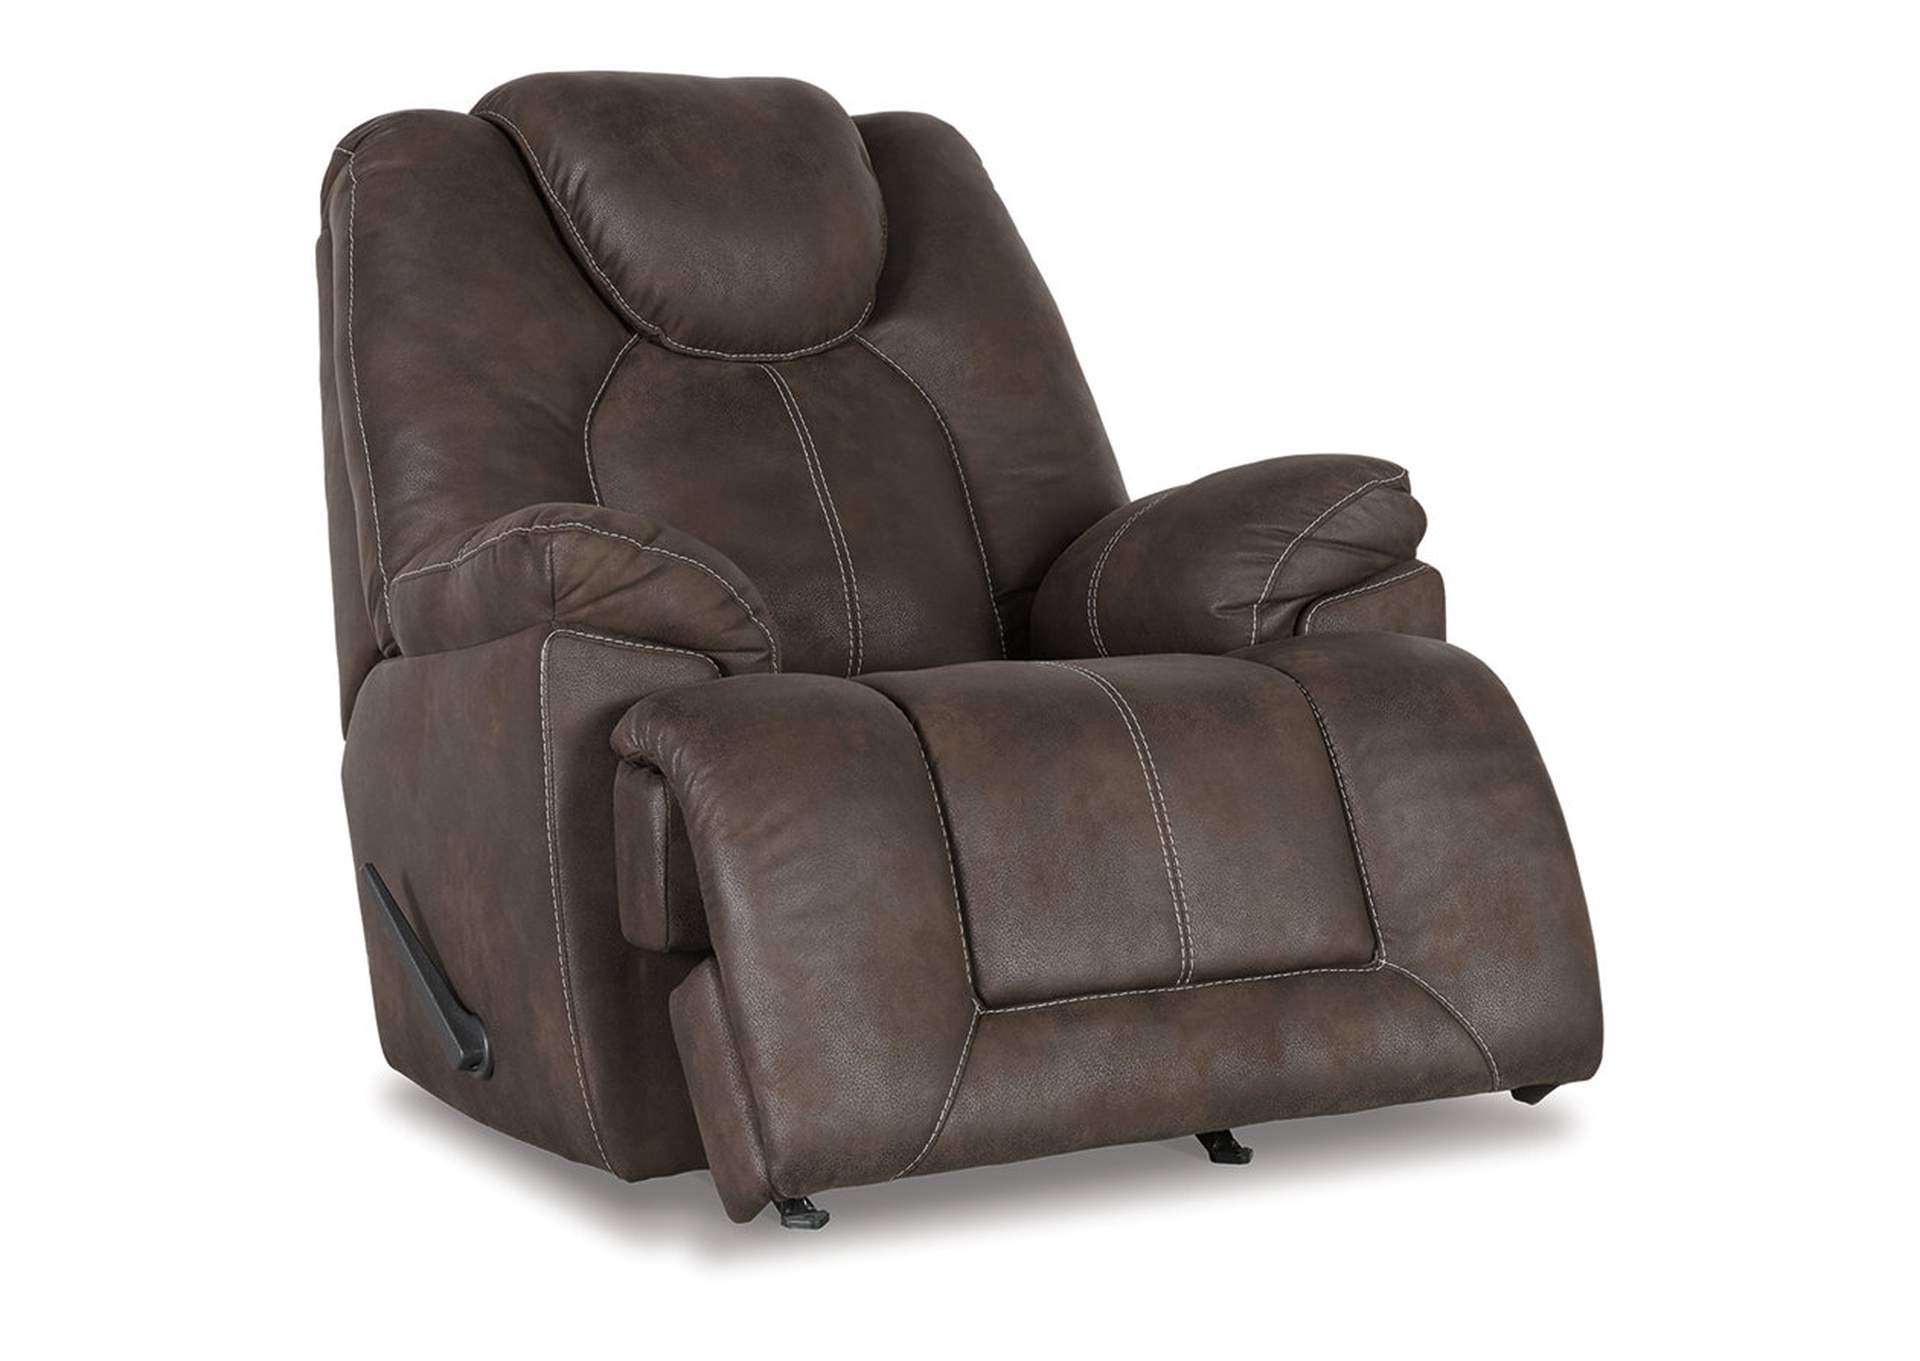 Warrior Fortress Recliner,Signature Design By Ashley